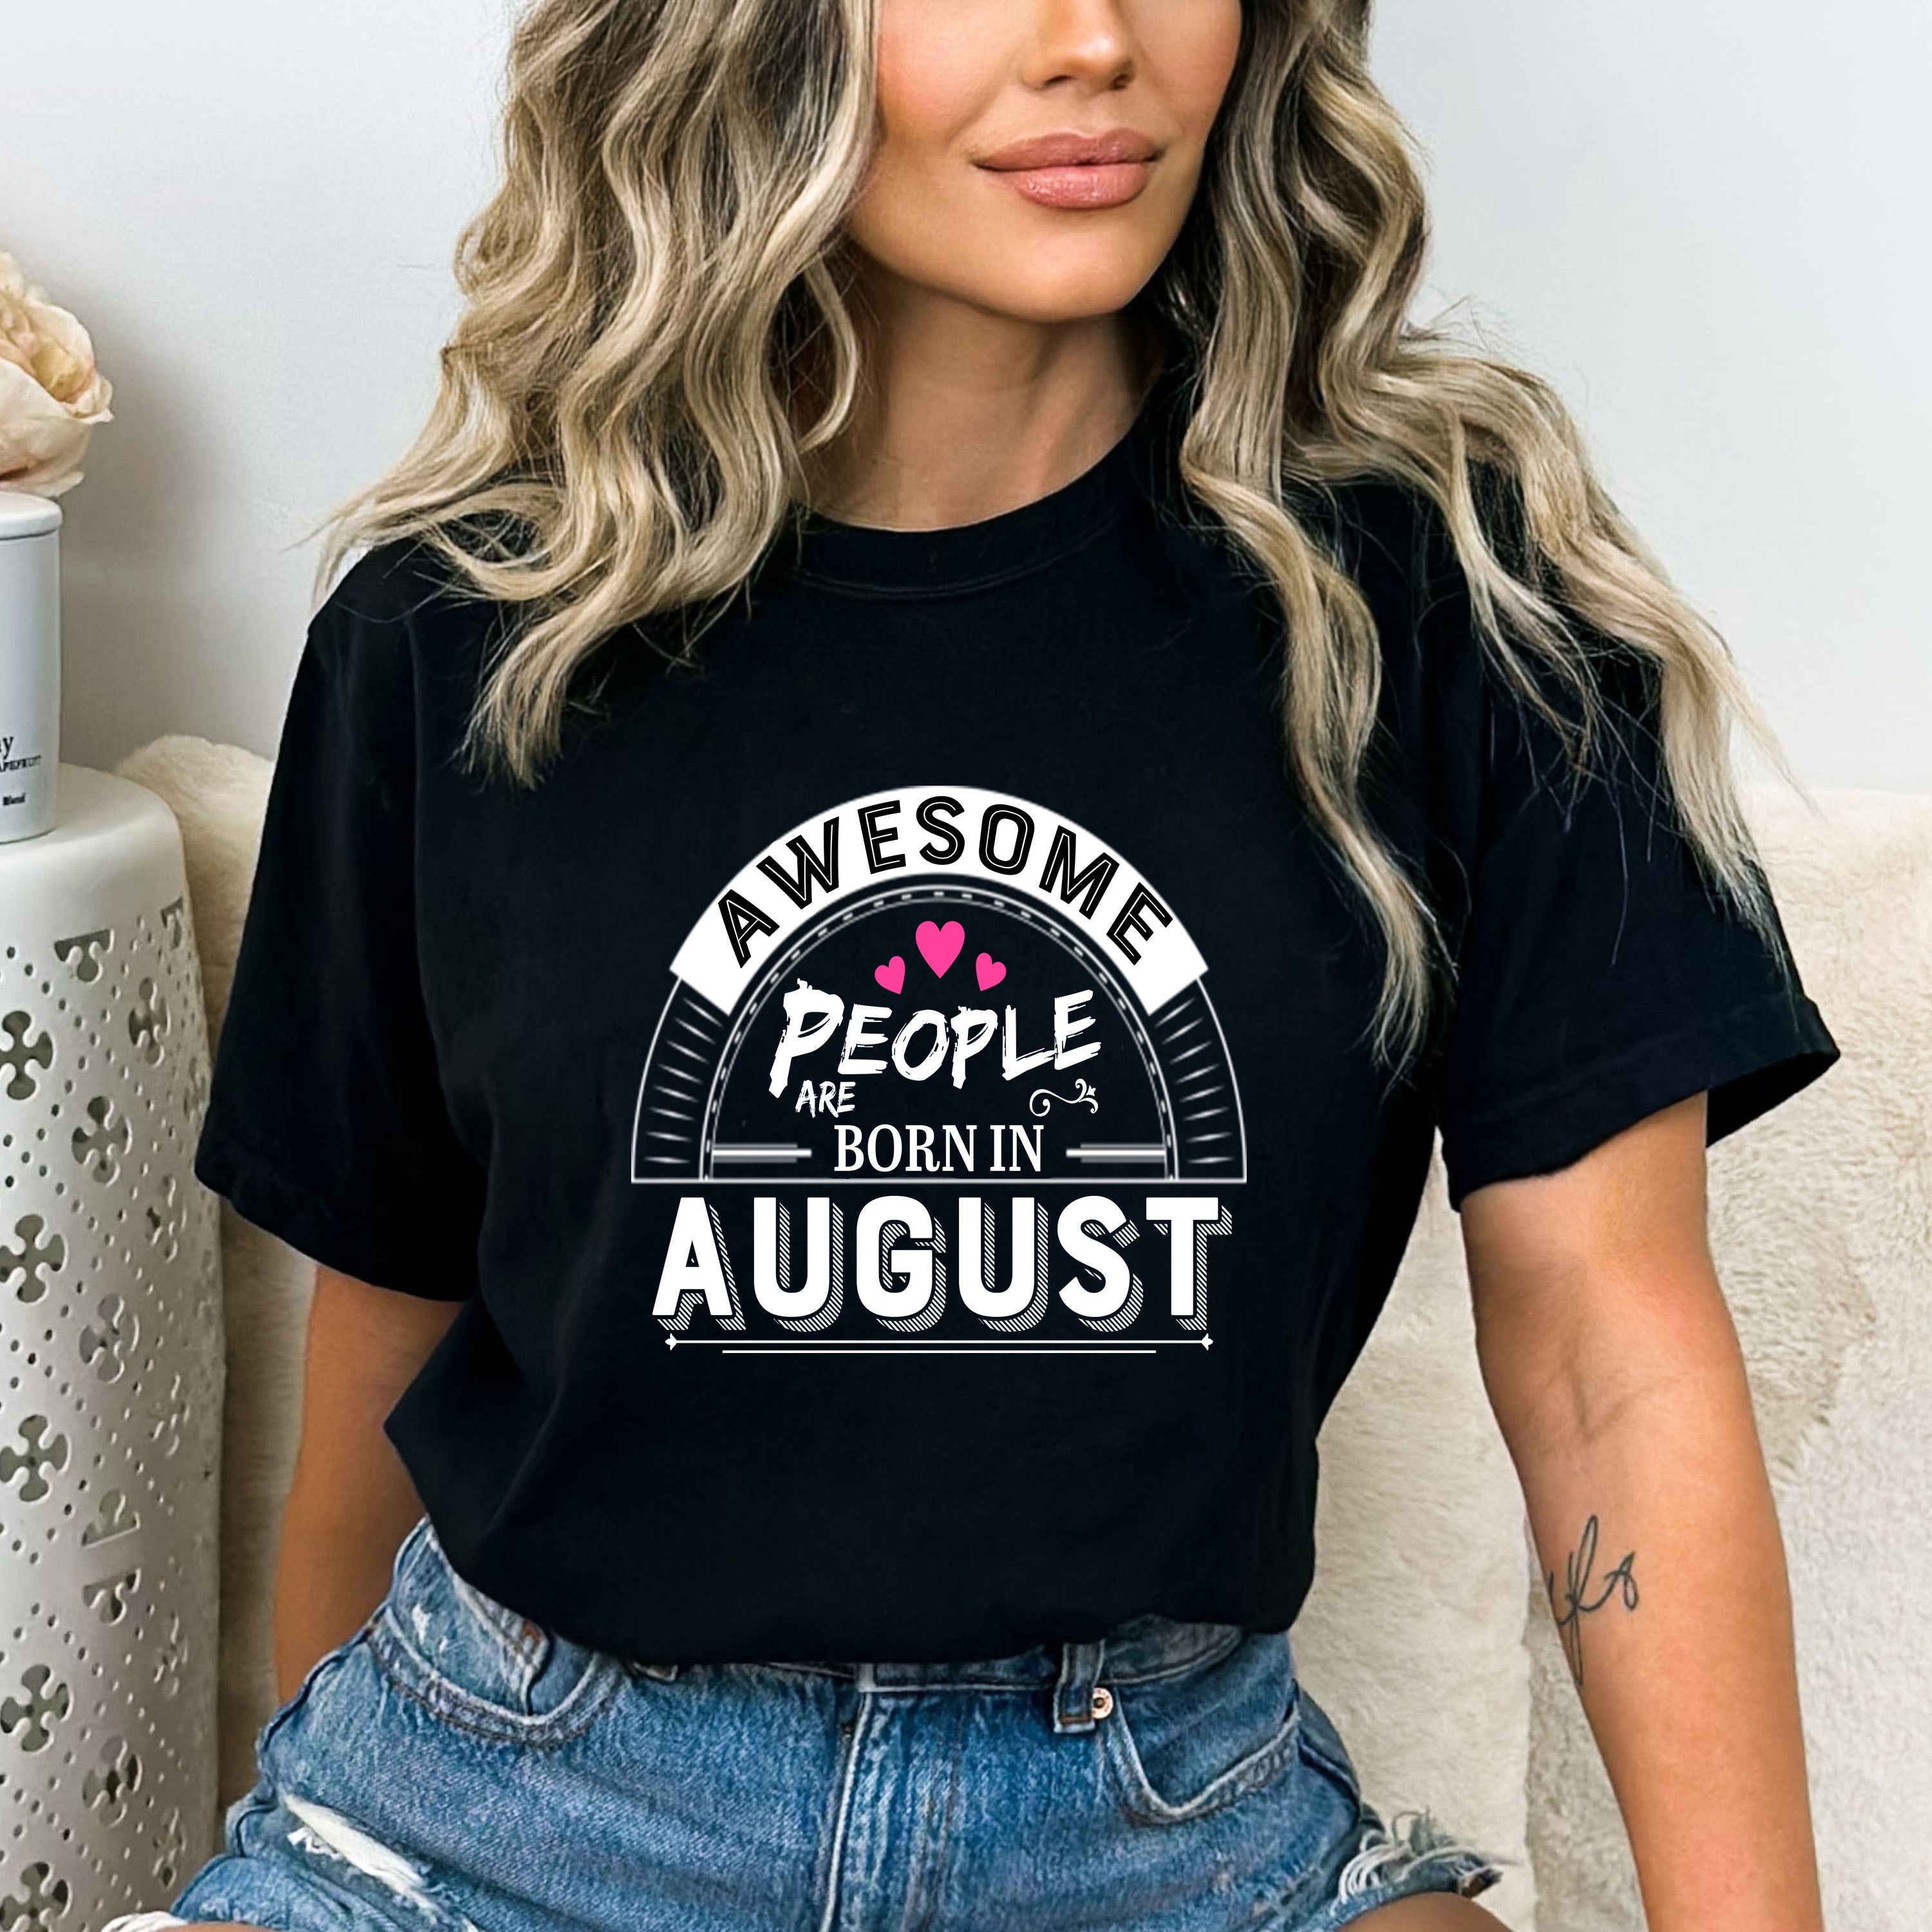 "Awesome People Are Born In August"